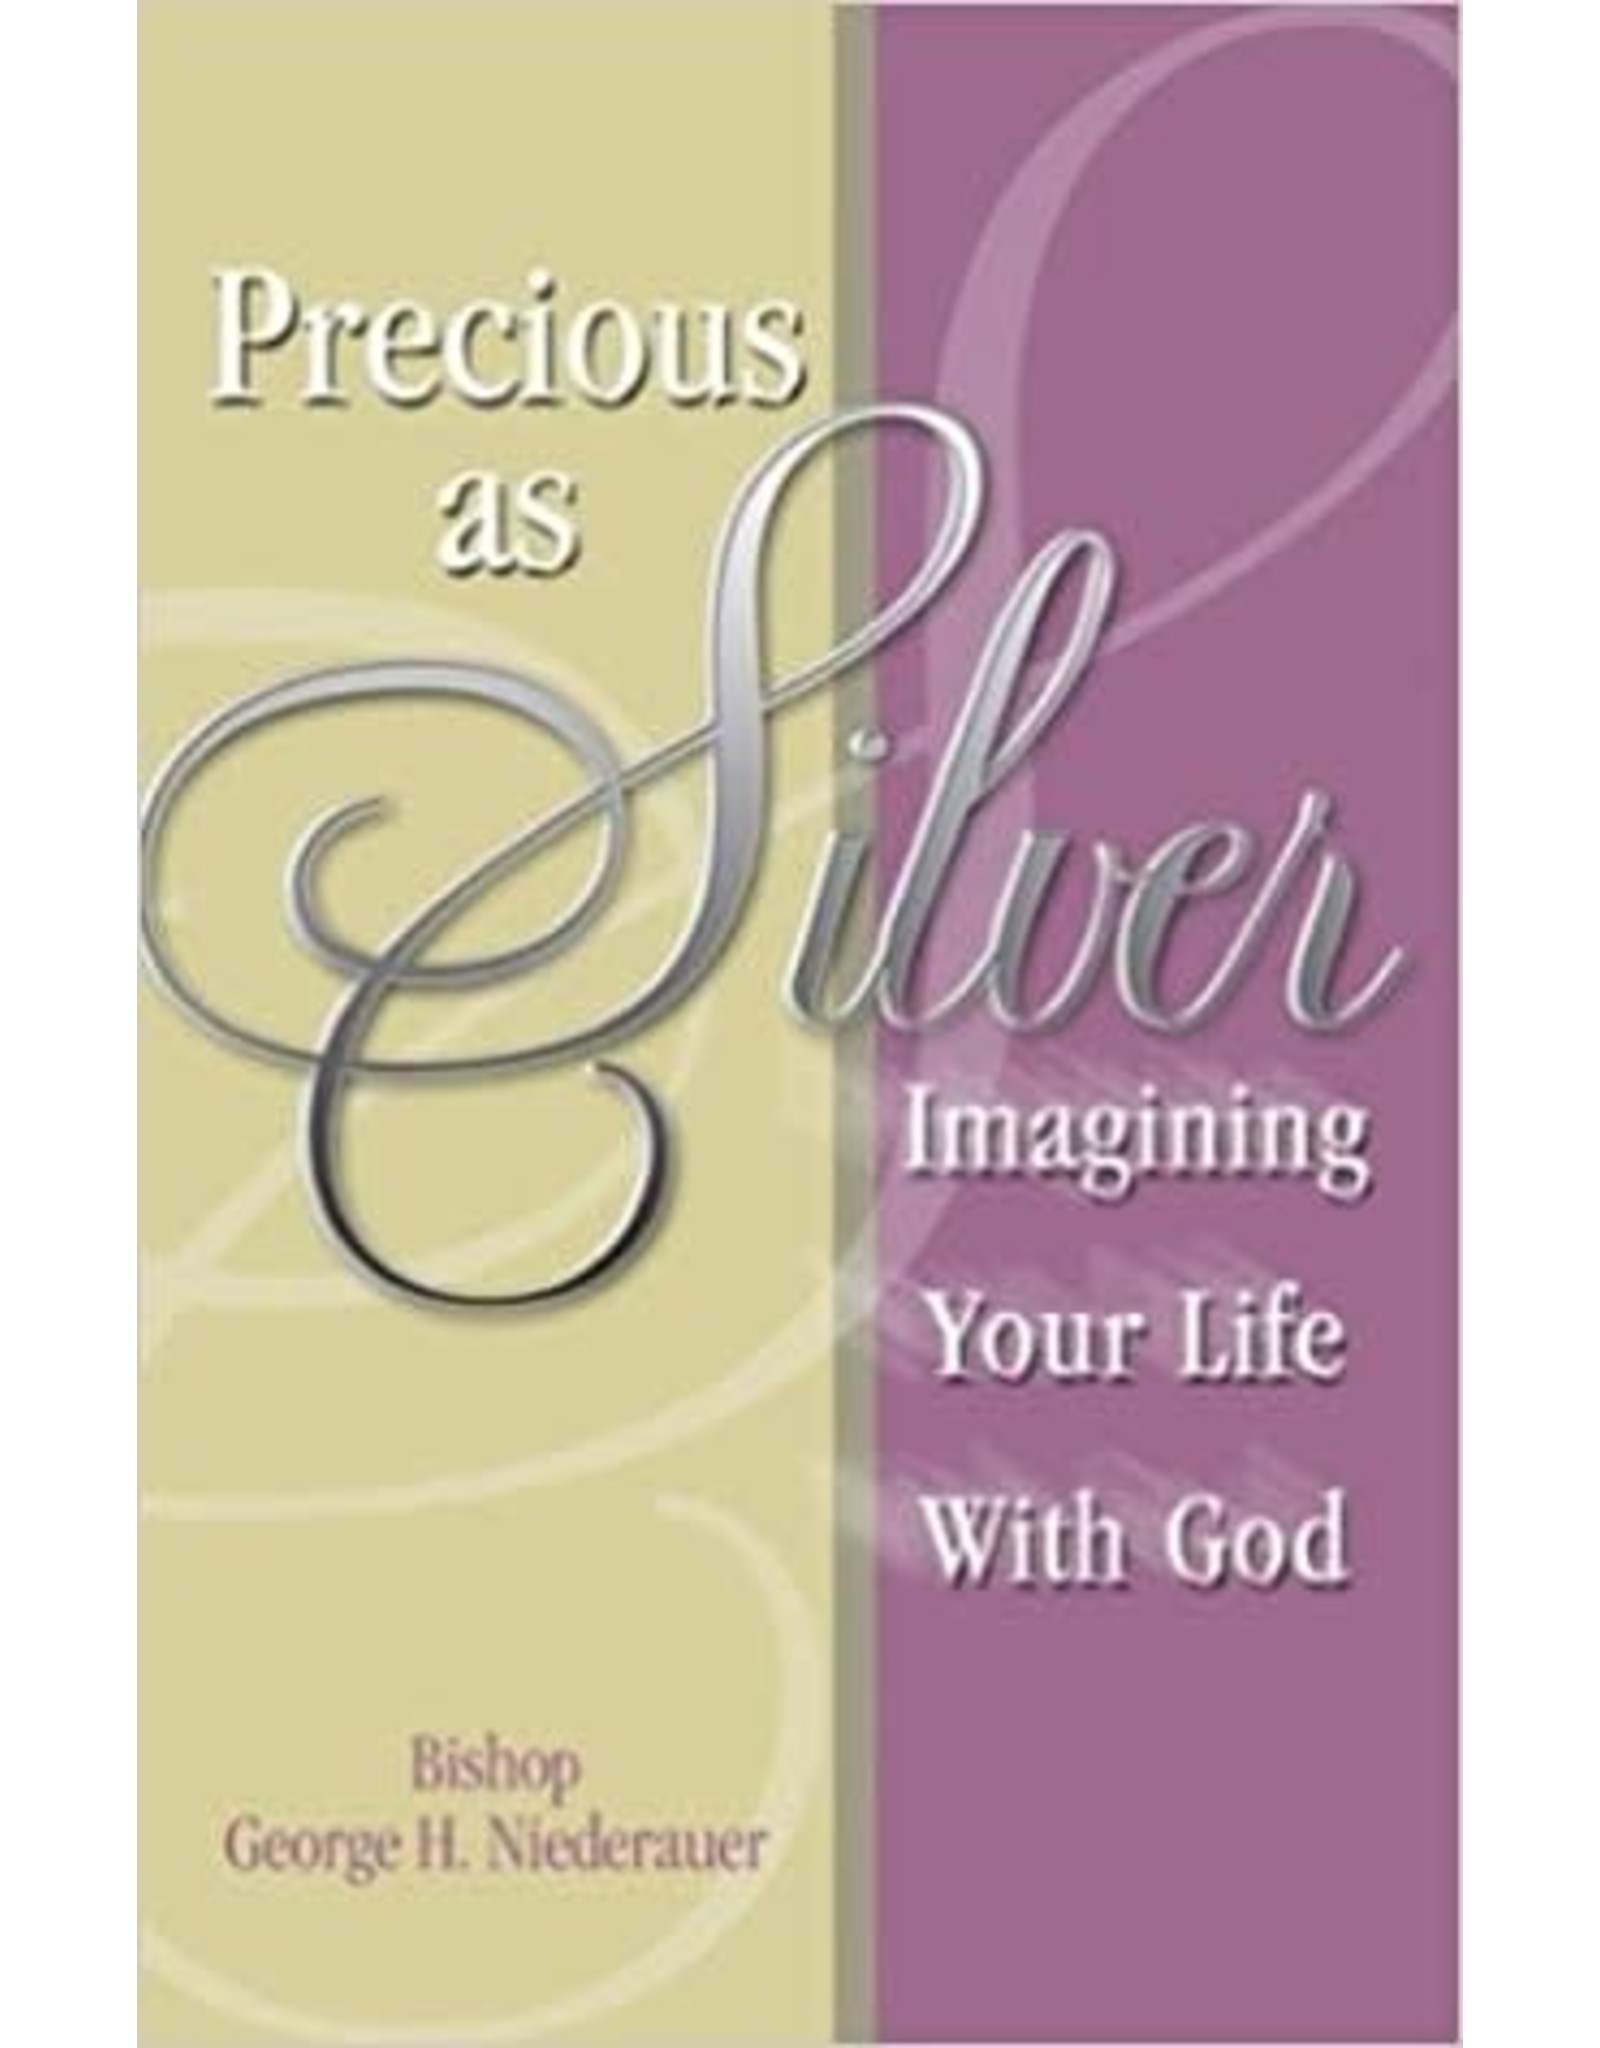 Ave Maria Precious as Silver: Imagining Your Life with God